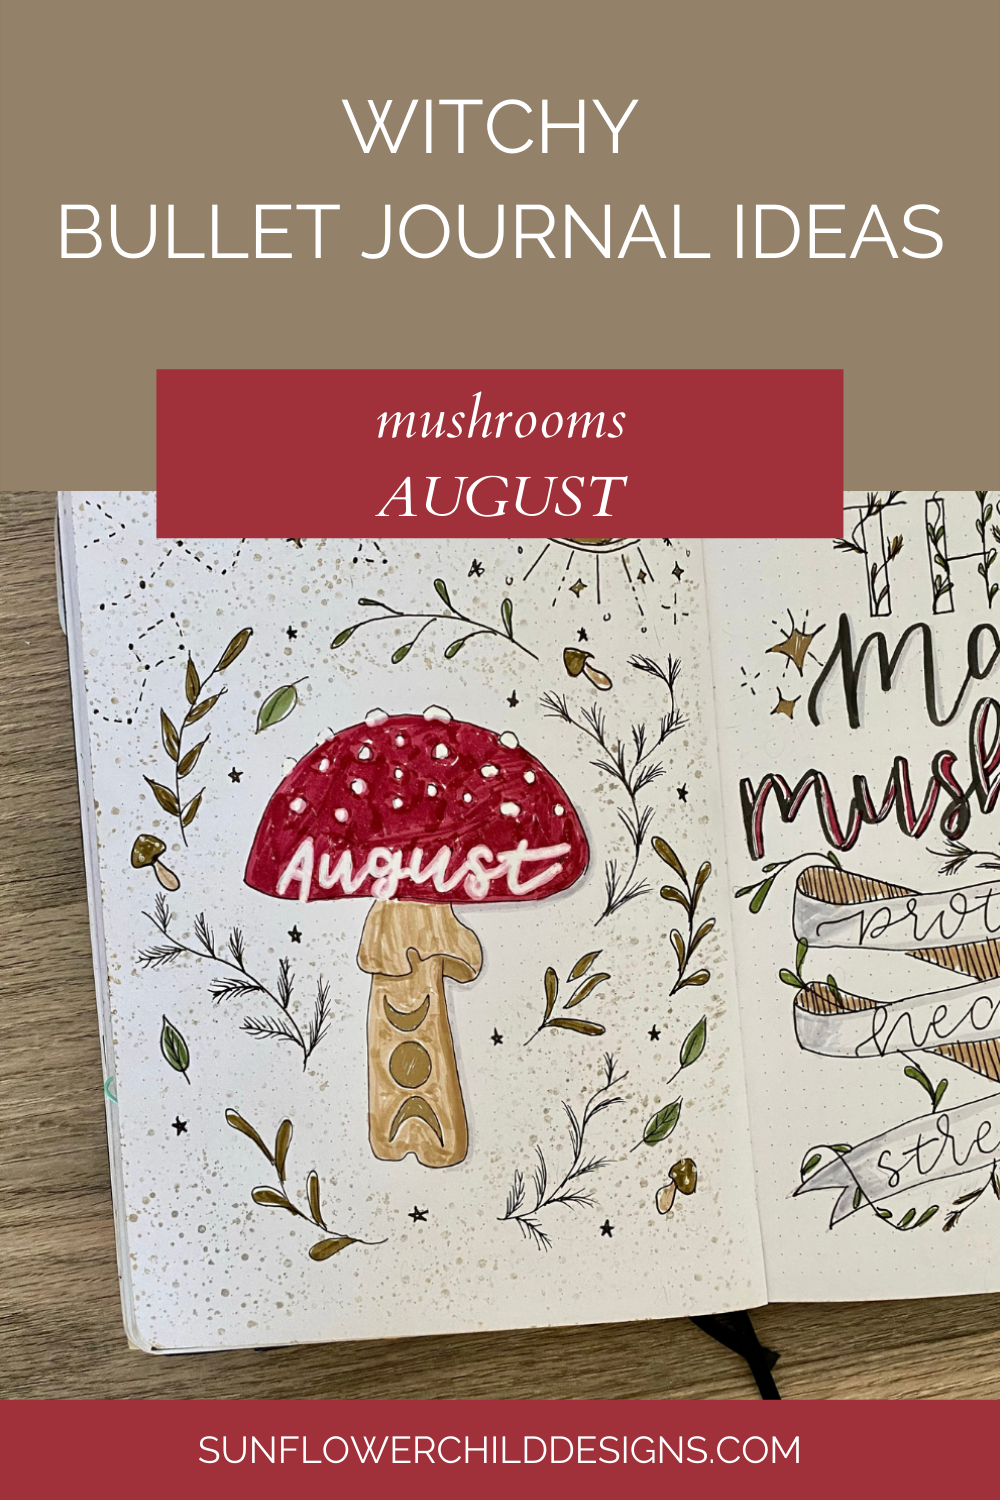 witchy-bullet-journal-ideas-august-bullet-journal-ideas 2.png